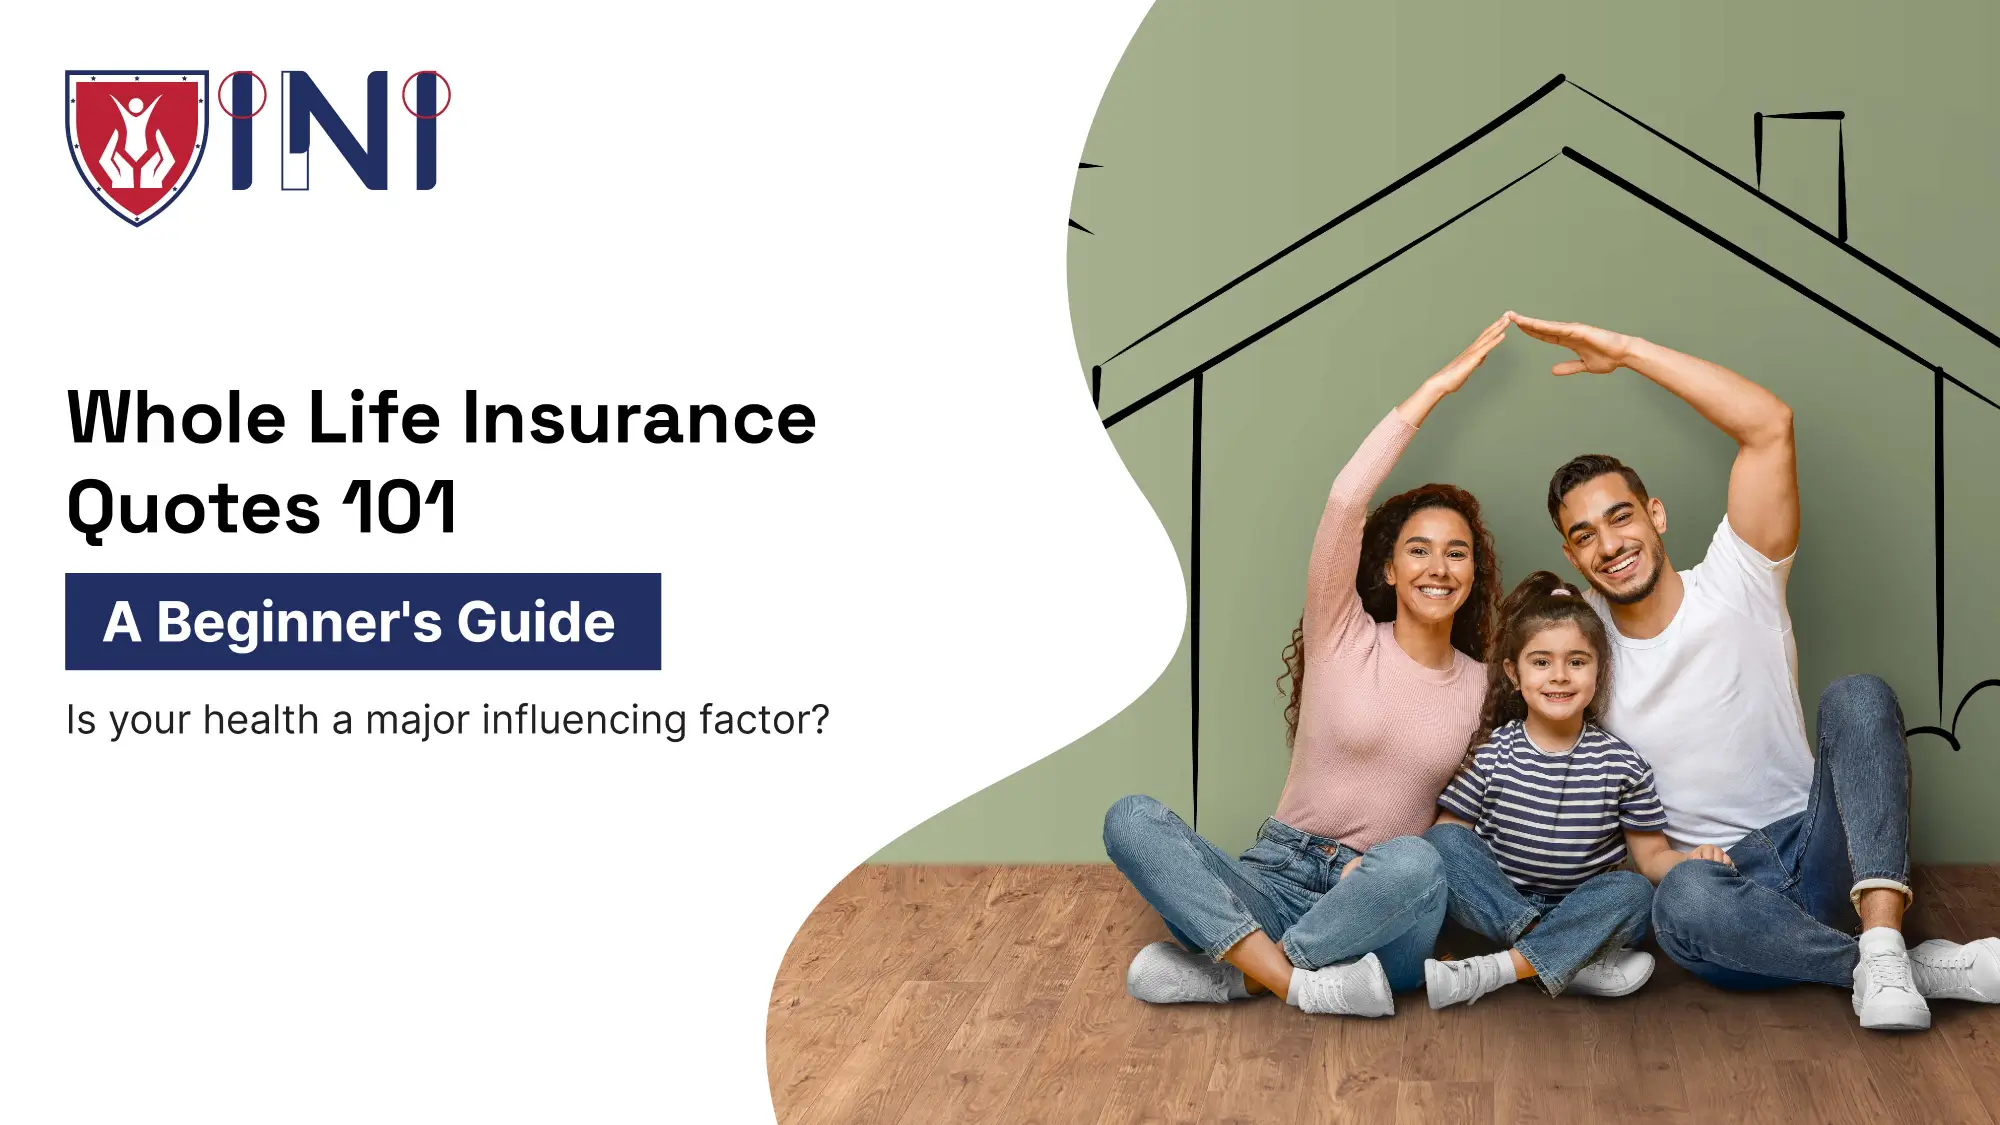 Whole Life Insurance Quotes 101: A Beginner's Guide.